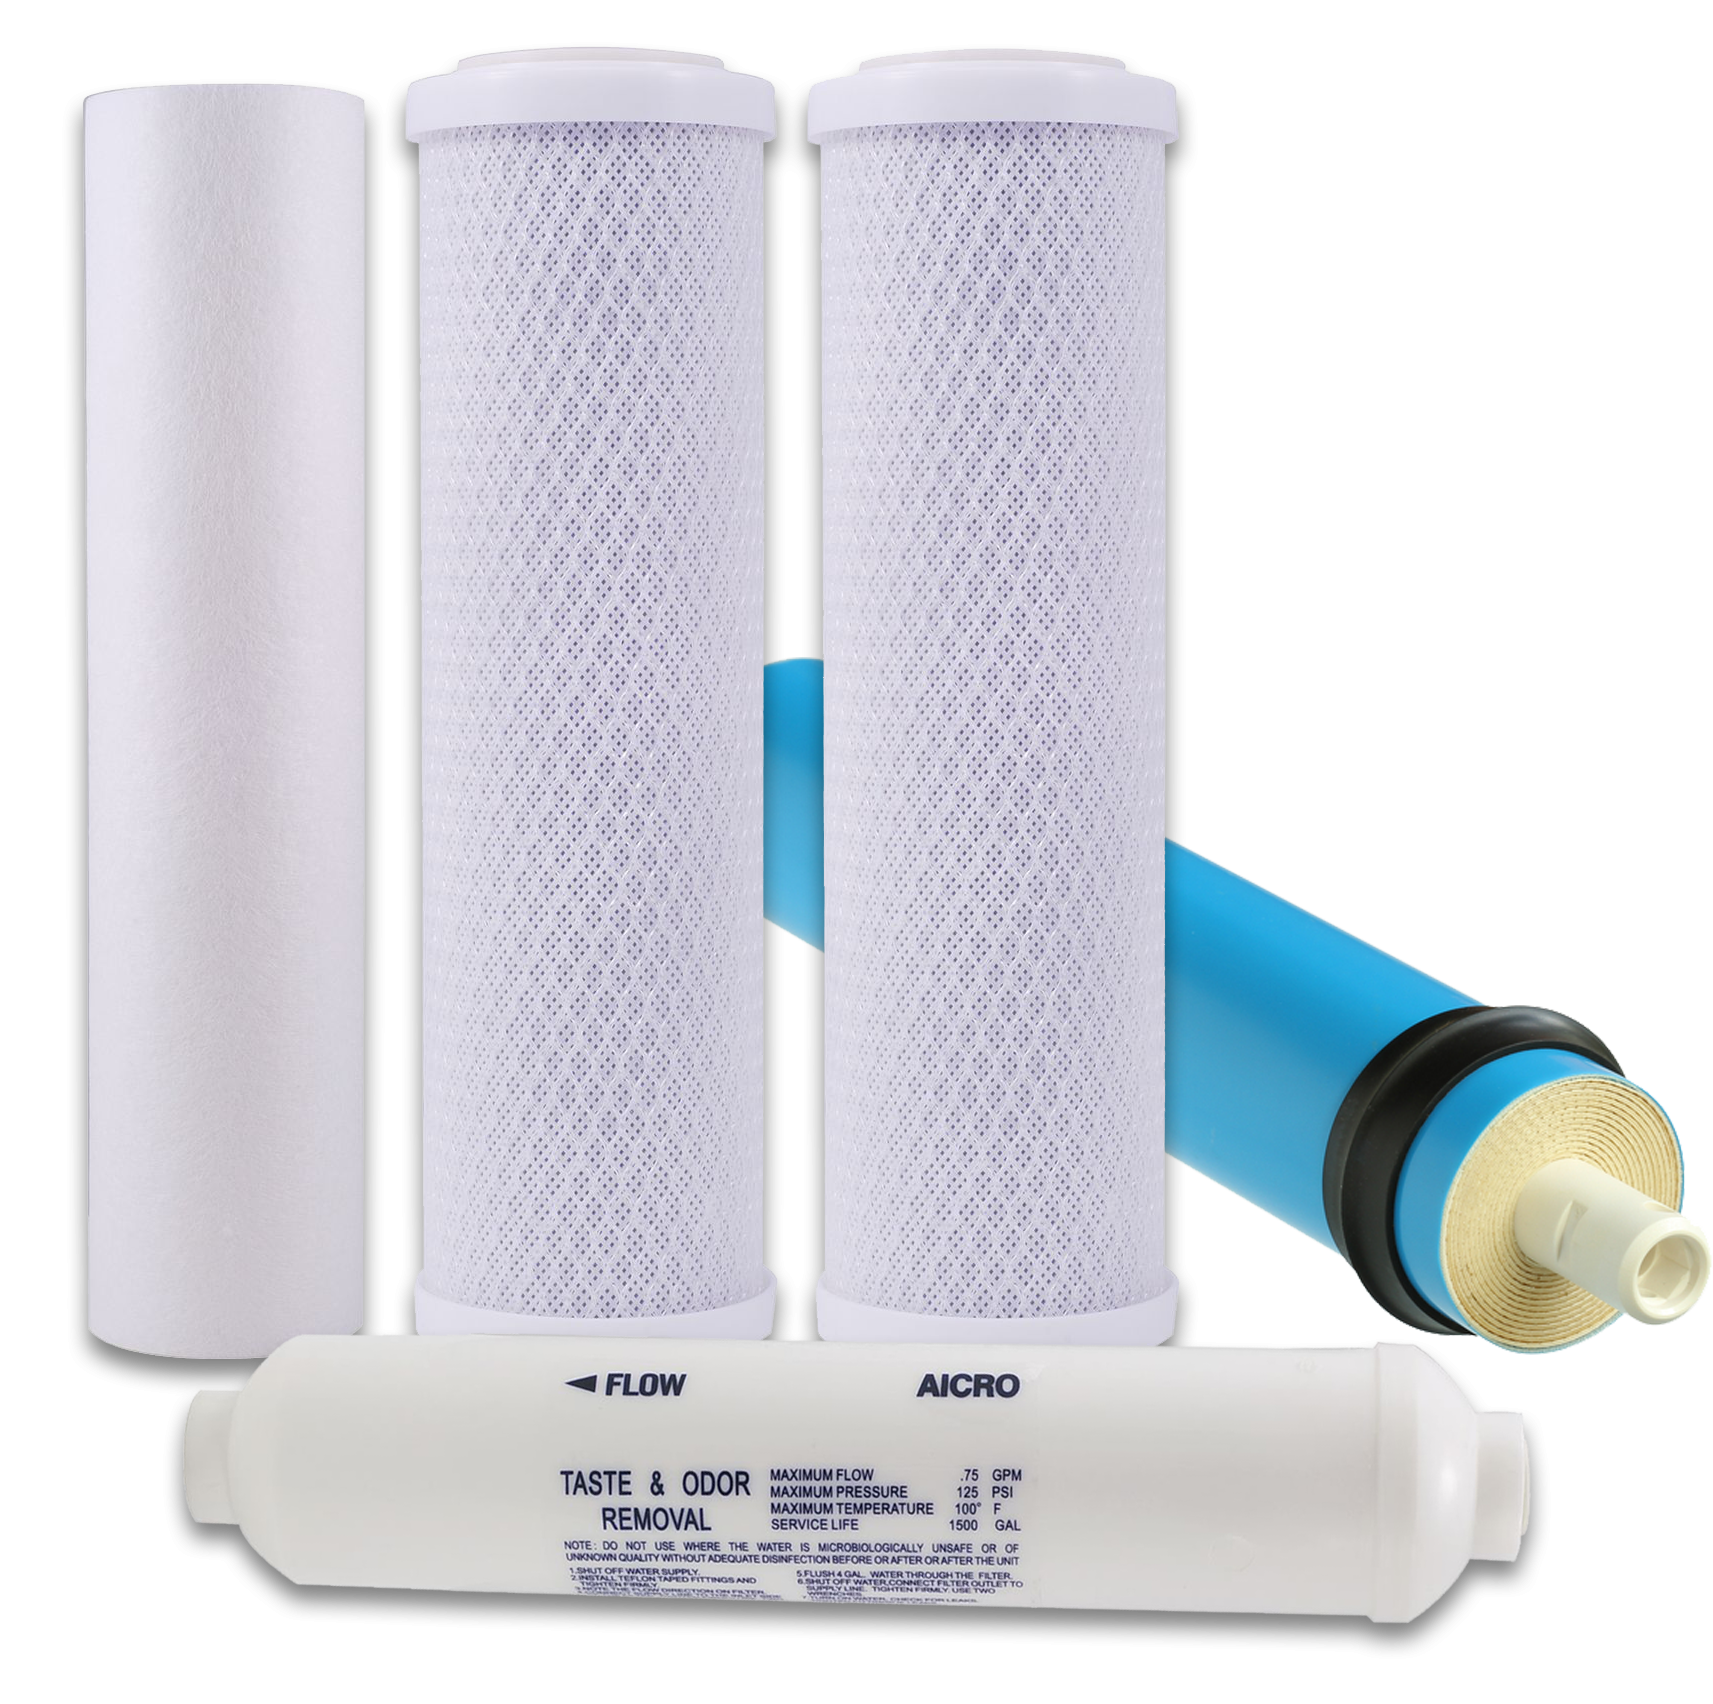 Replacement Filter Kits